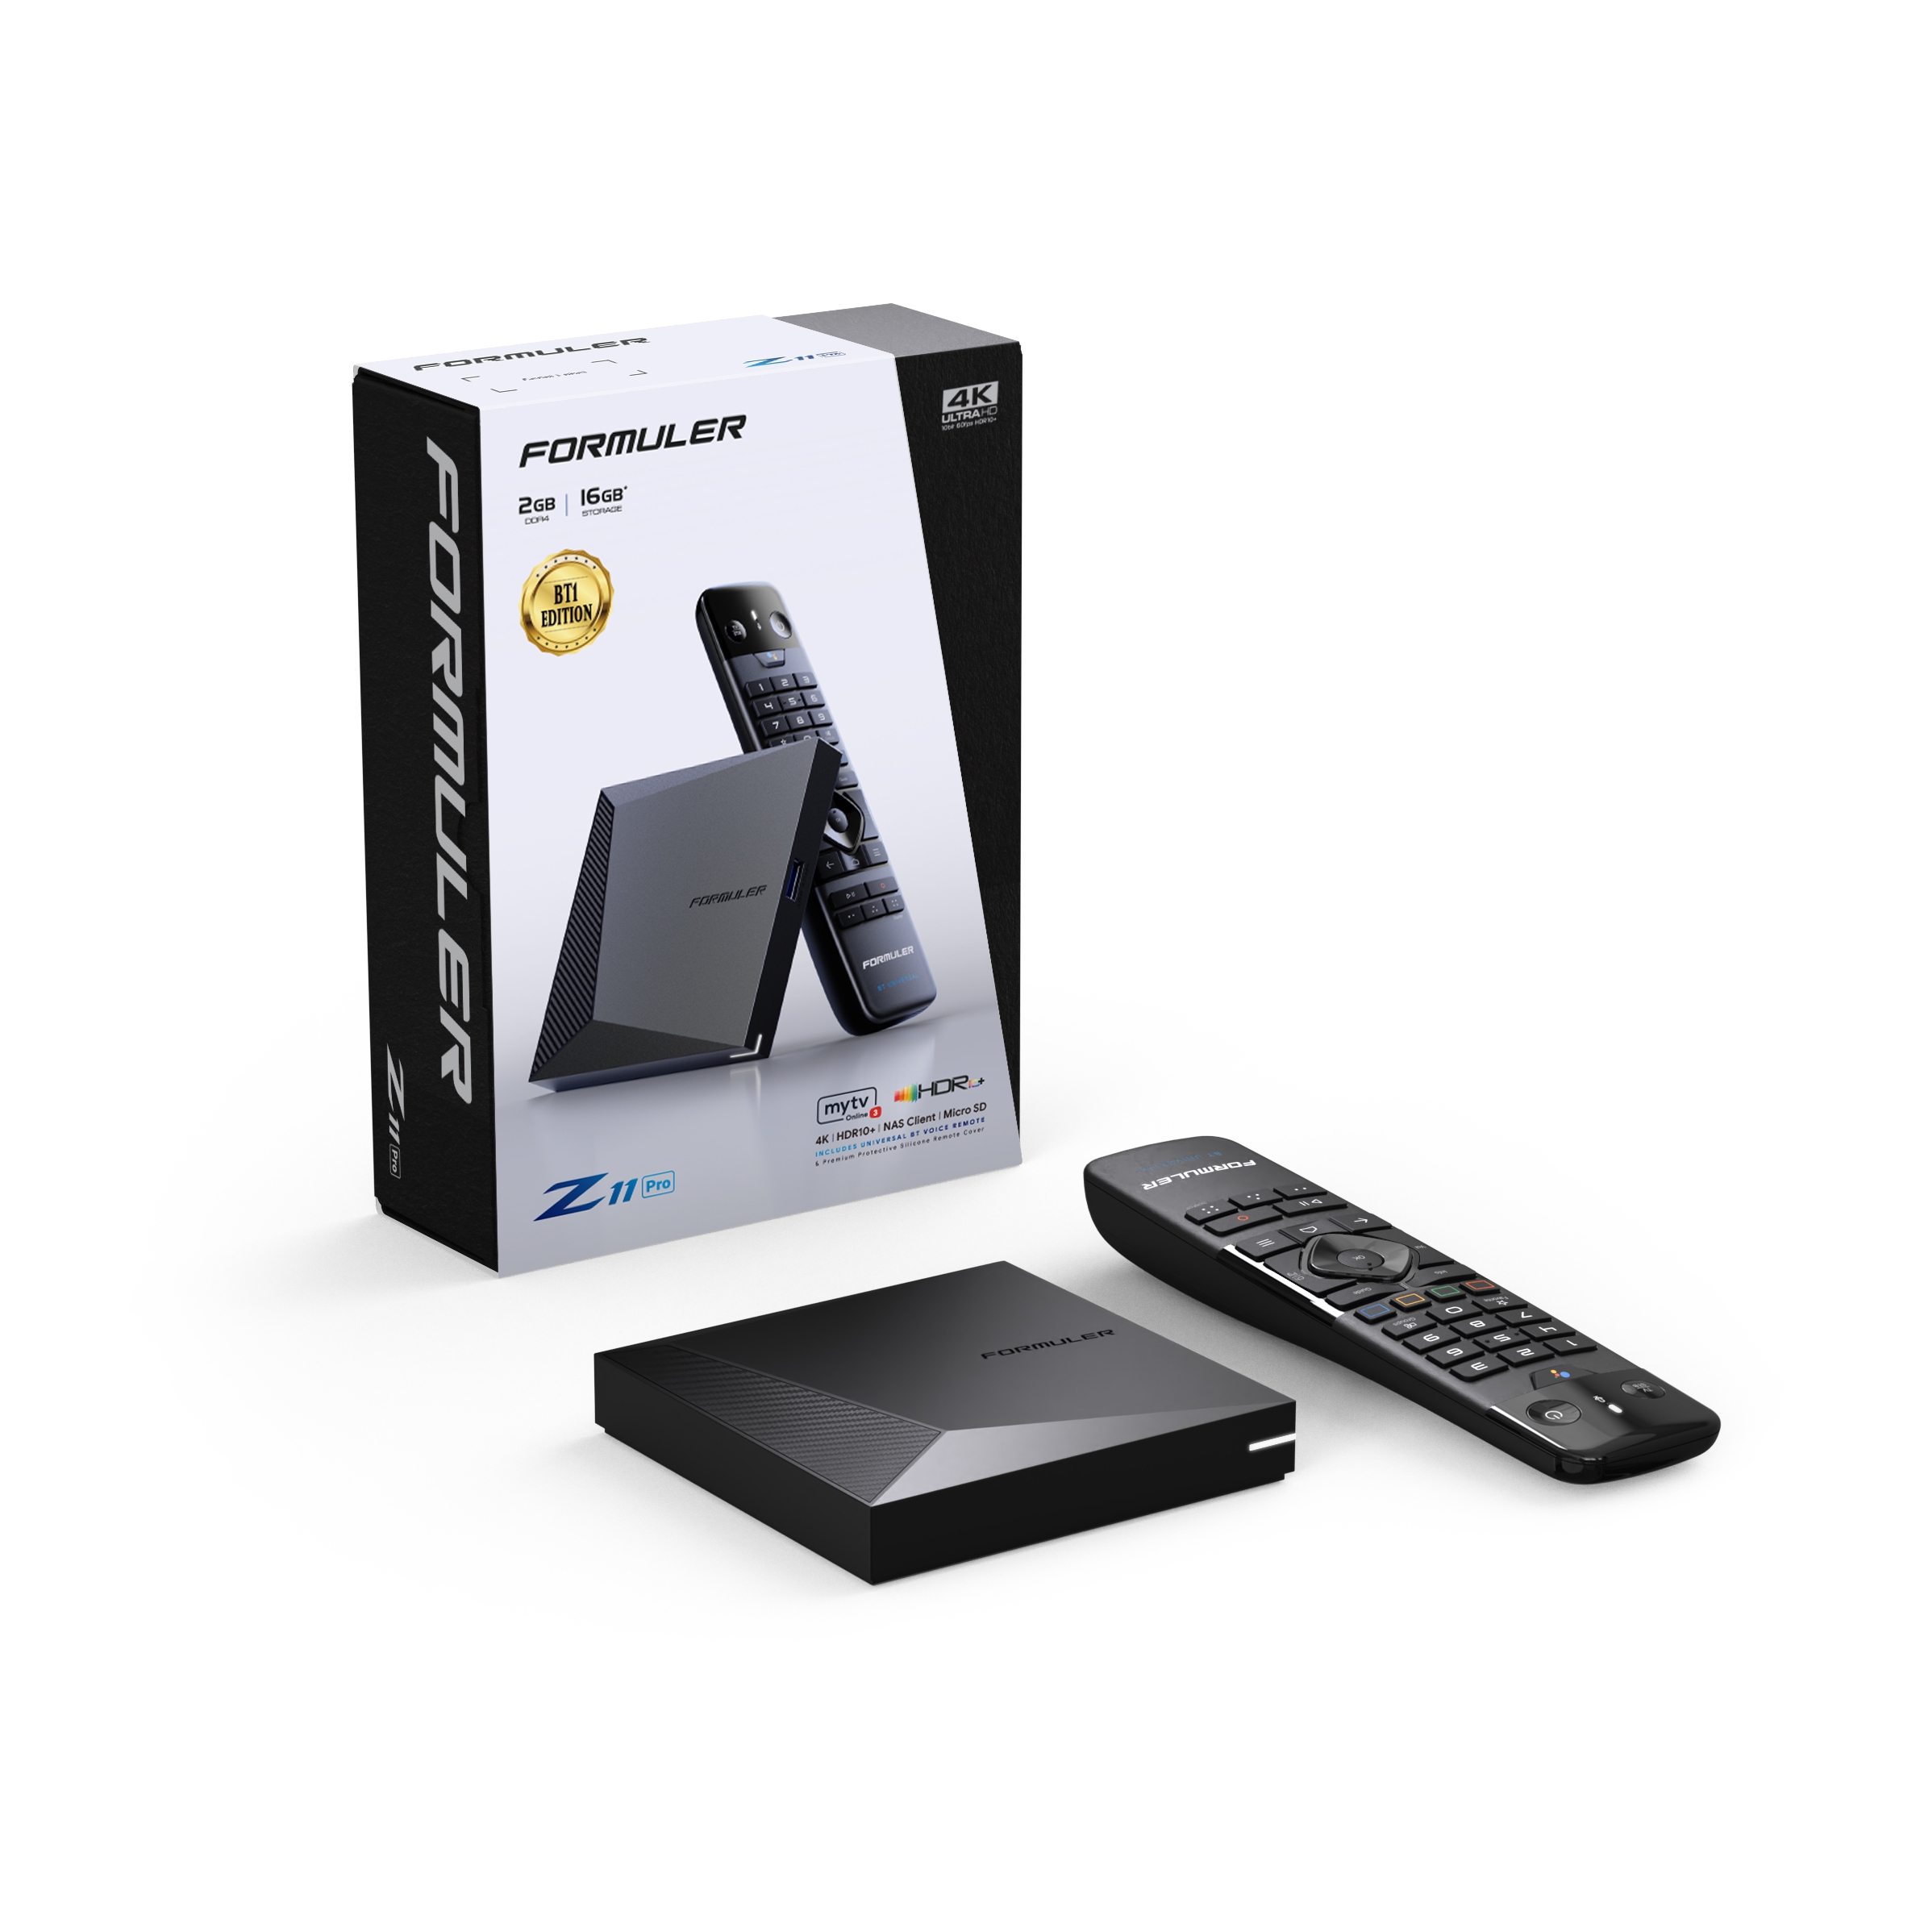 Formuler Z11 Pro BT1-Edition 4K UHD Android 11 IP-Receiver HDR10, Dual-WiFi, HDMI, USB 3.0, MicroSD